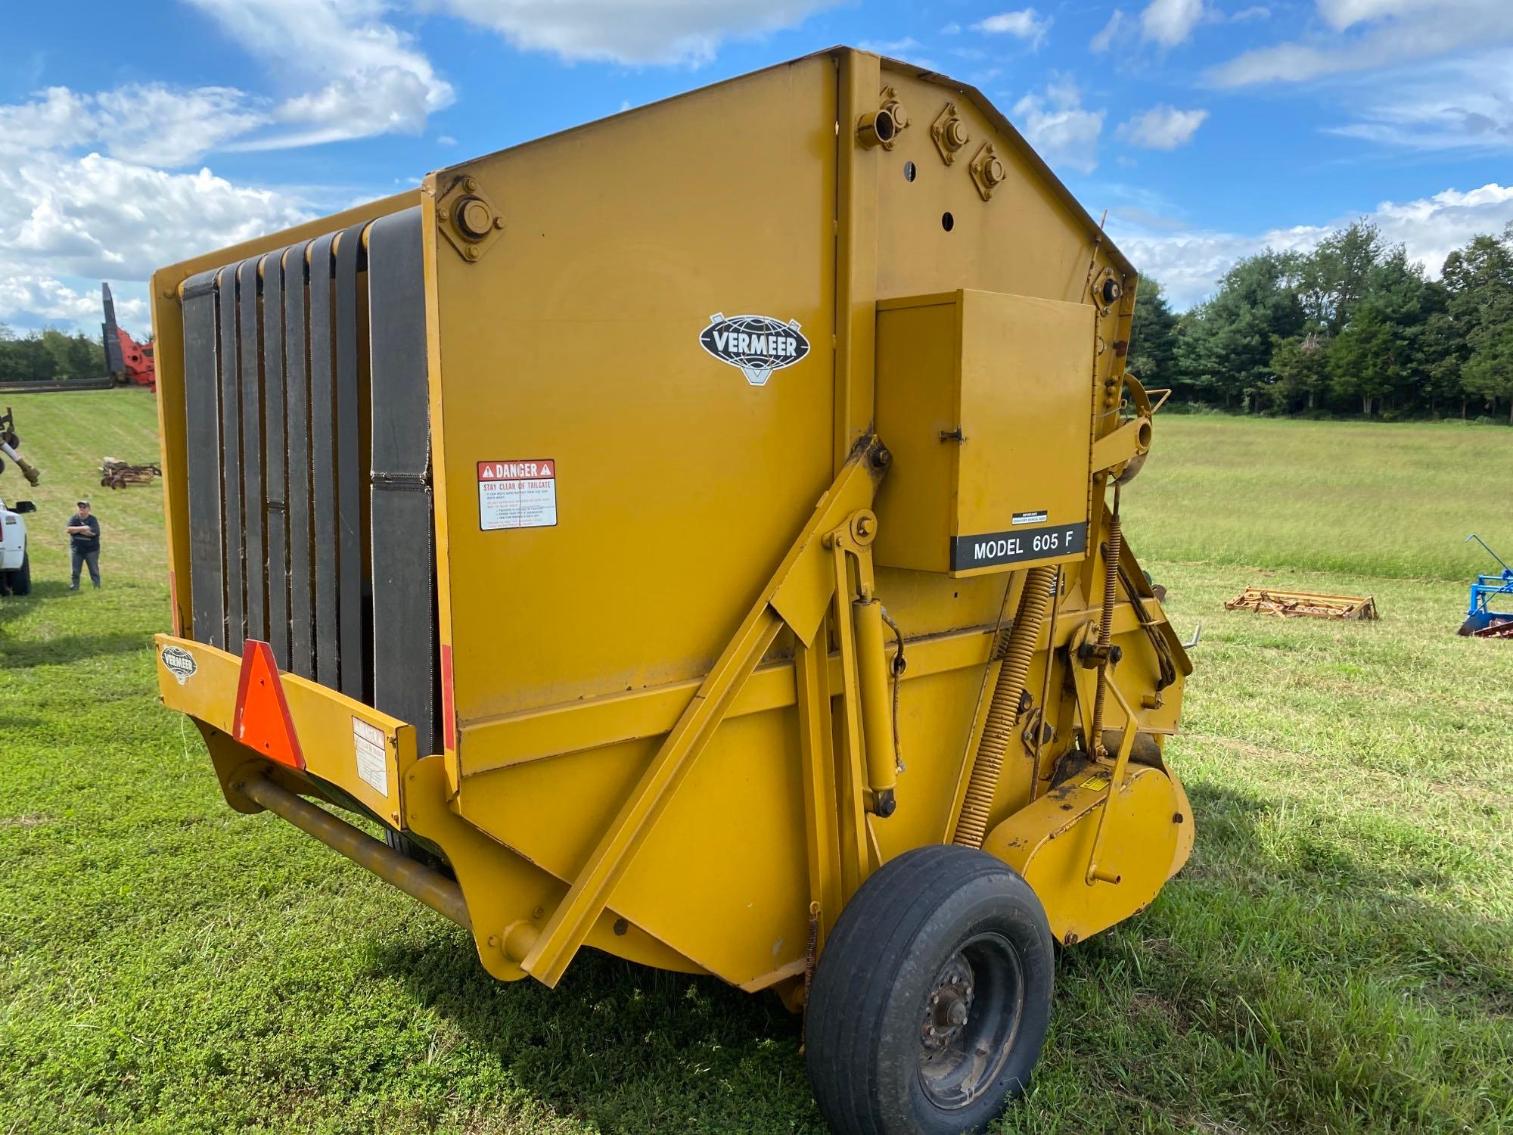 Image for Vermeer Model 605 F Round Baler, 5'x6' Bales, Per seller- field ready w/ parts/PTO